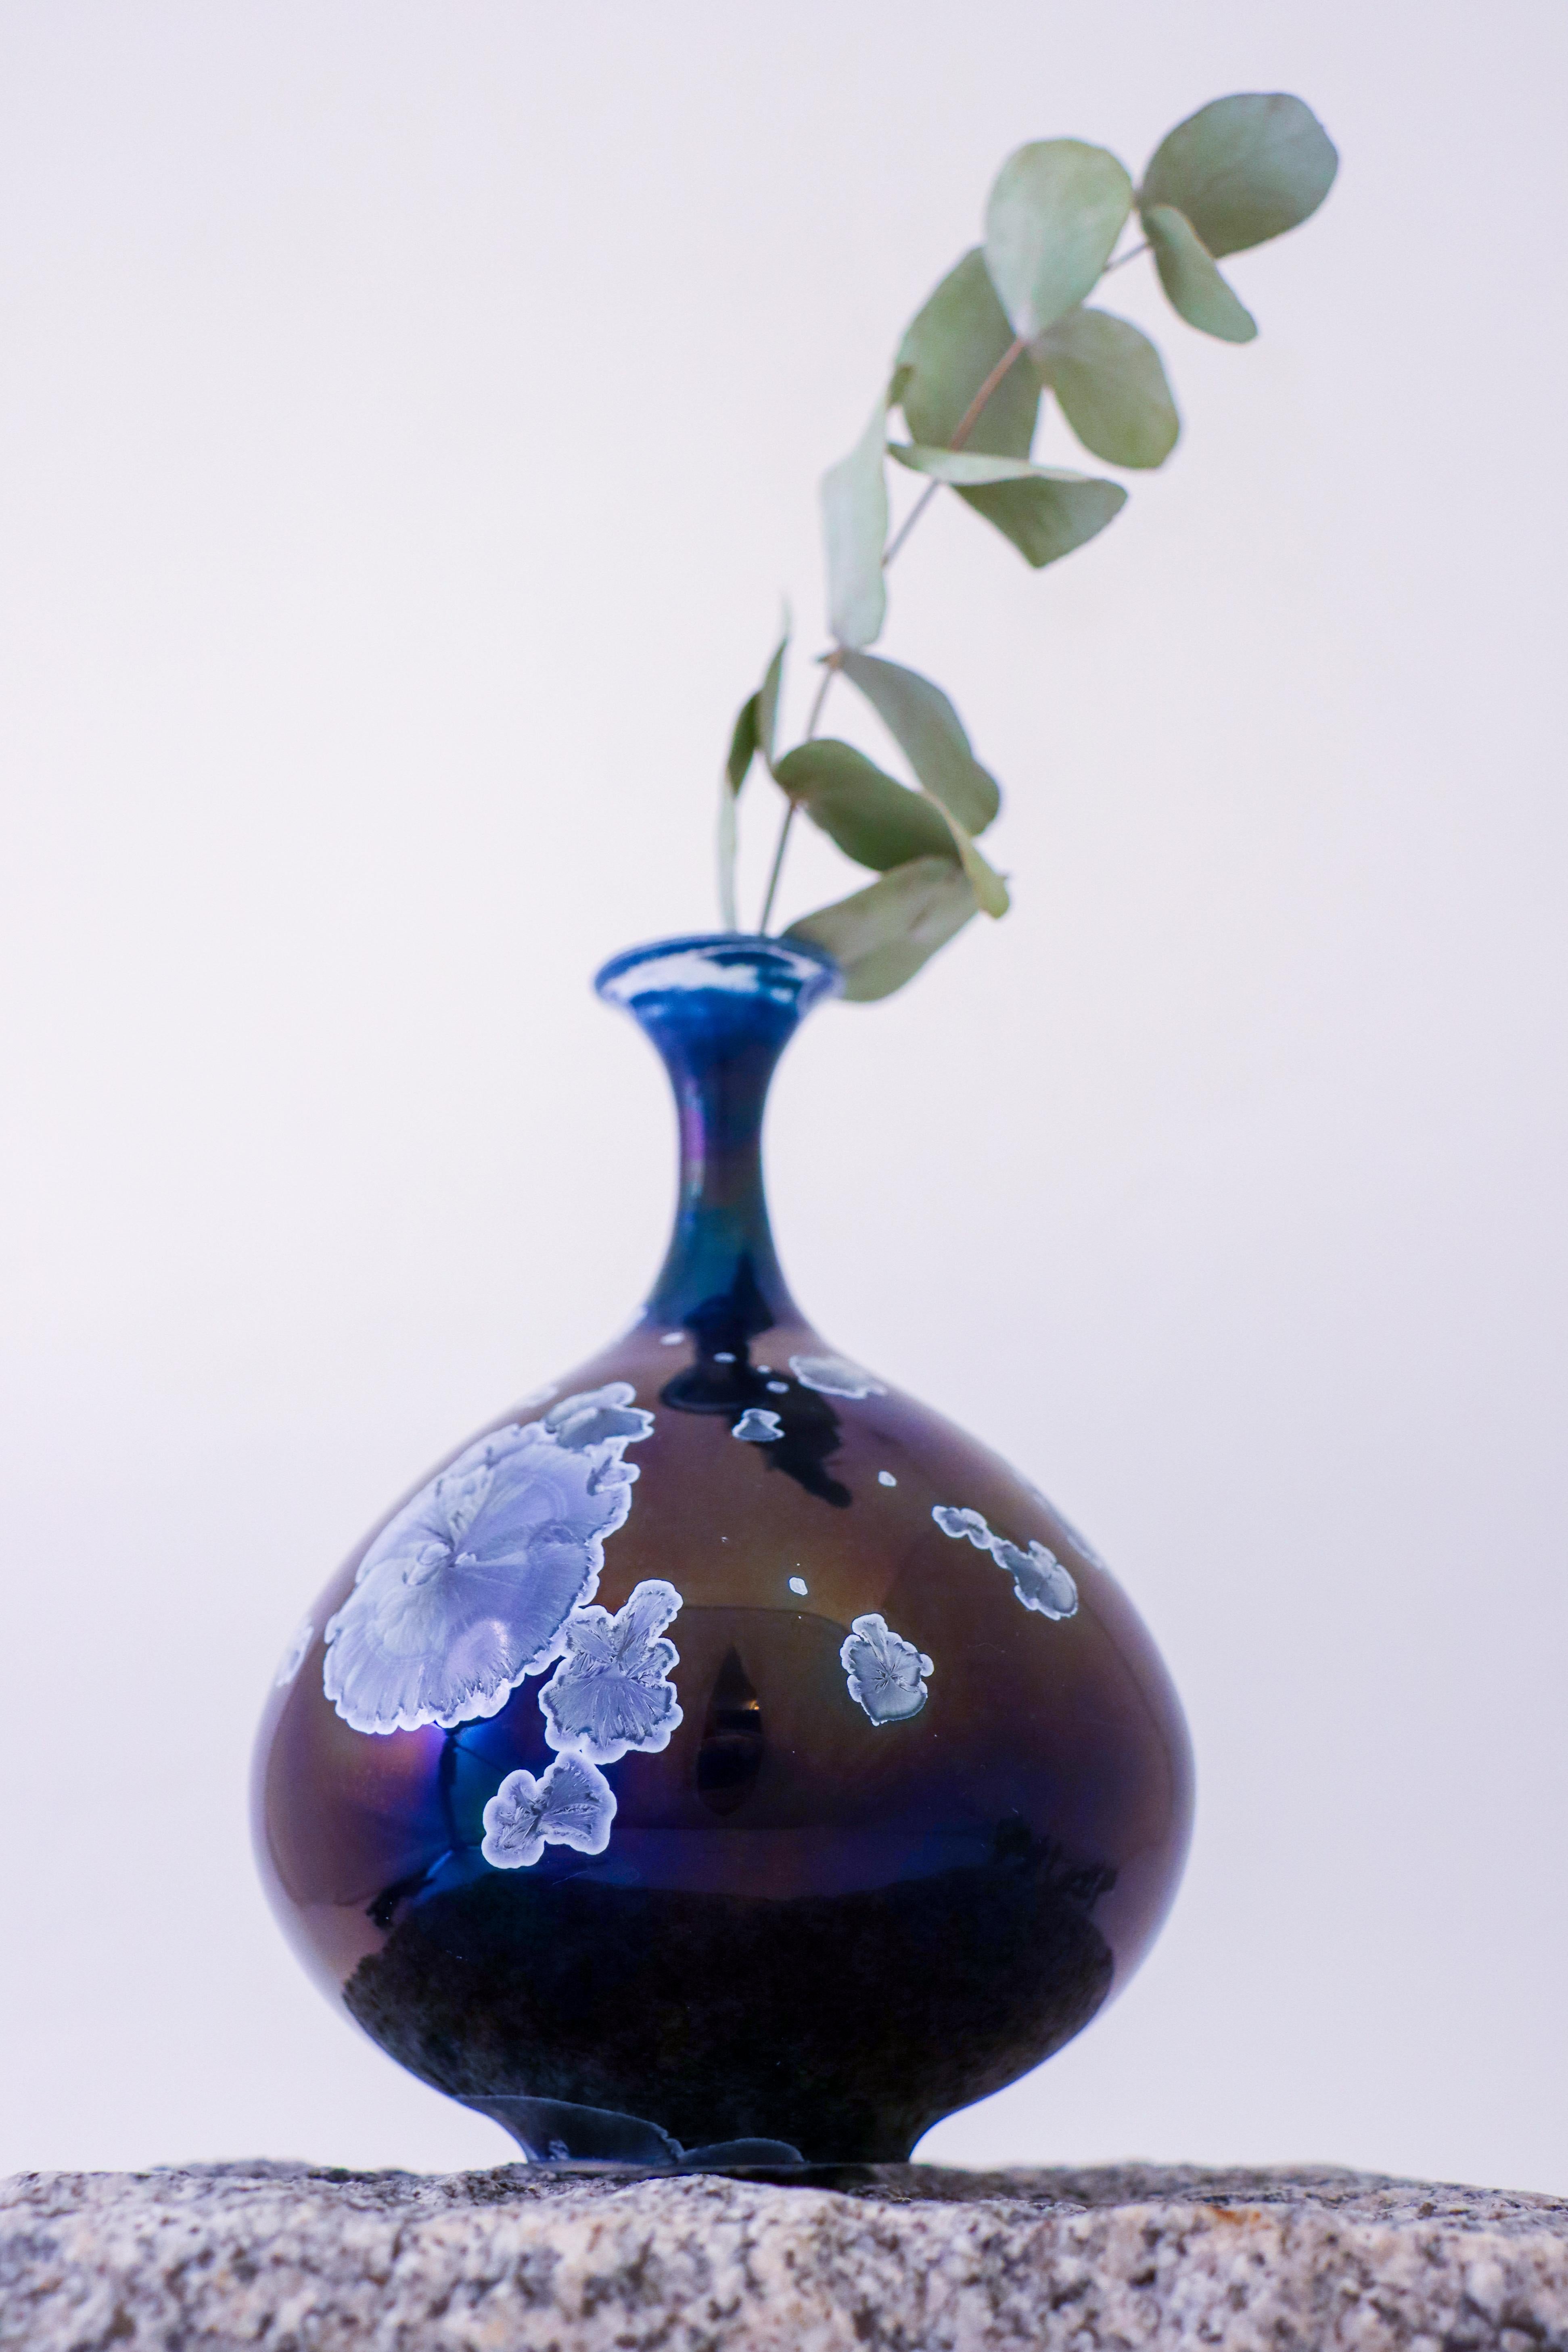 A midnight blue vase with a lovely crystalline glaze in silver designed by Isak Isaksson in Sweden. The vase is 15 cm (6